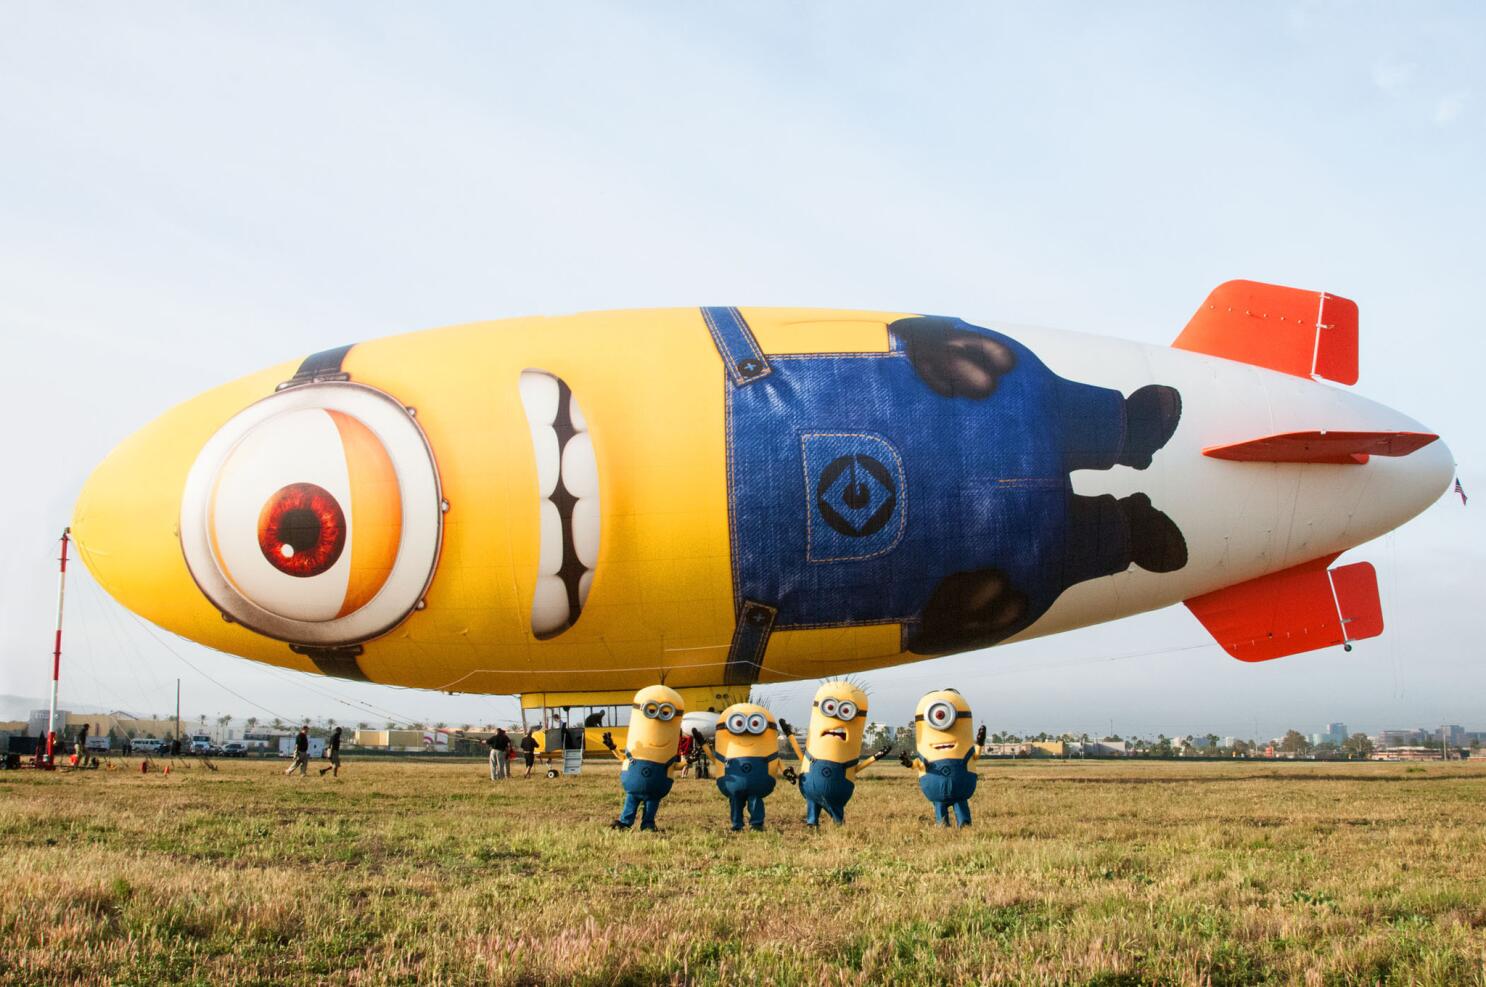 Despicable Me 2' blimp enters new frontier of movie marketing - Los Angeles  Times